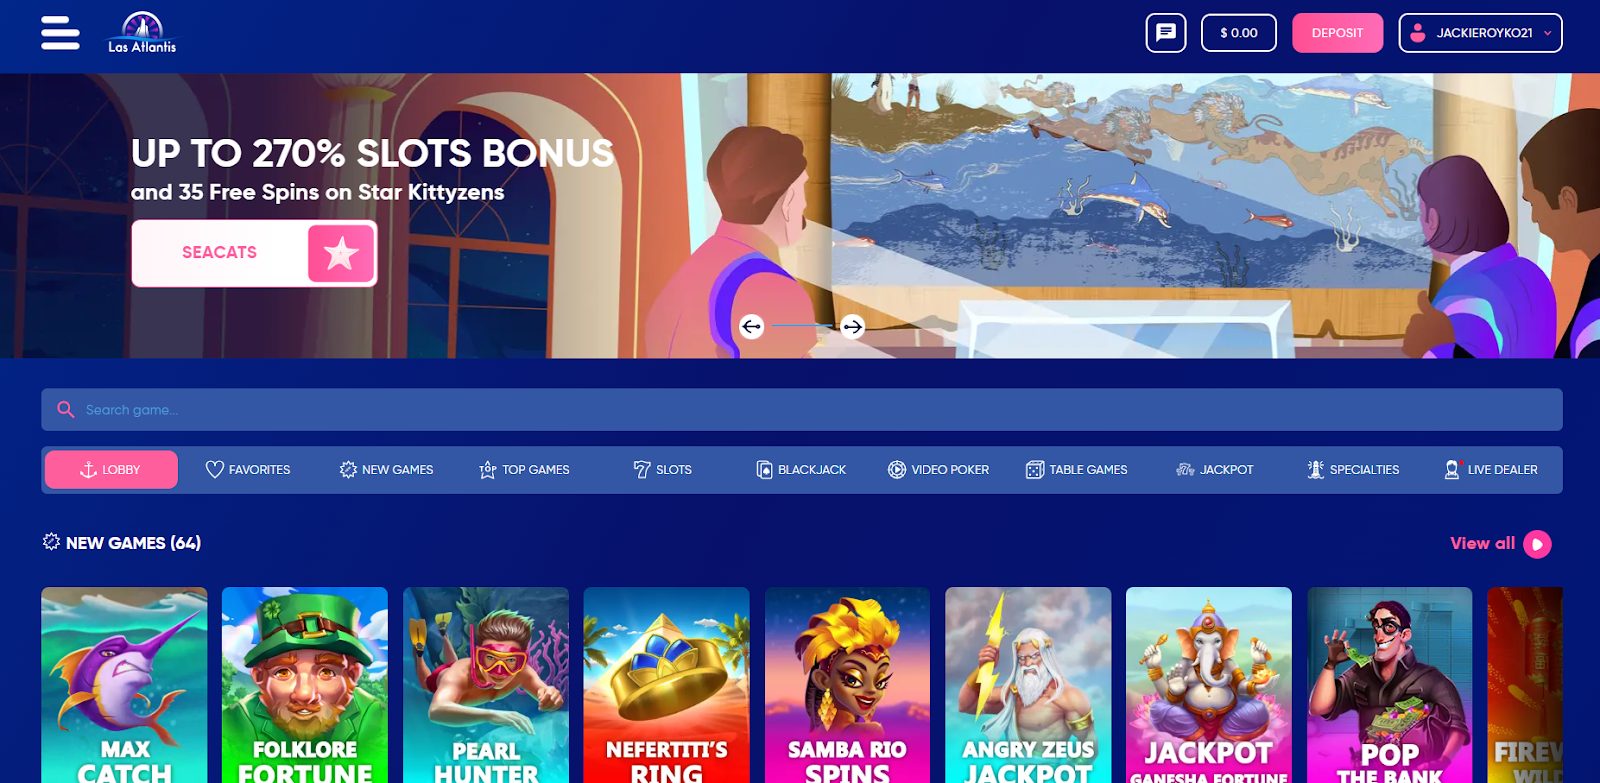 View of the homepage of Las Atlantis you unlock once you register. 